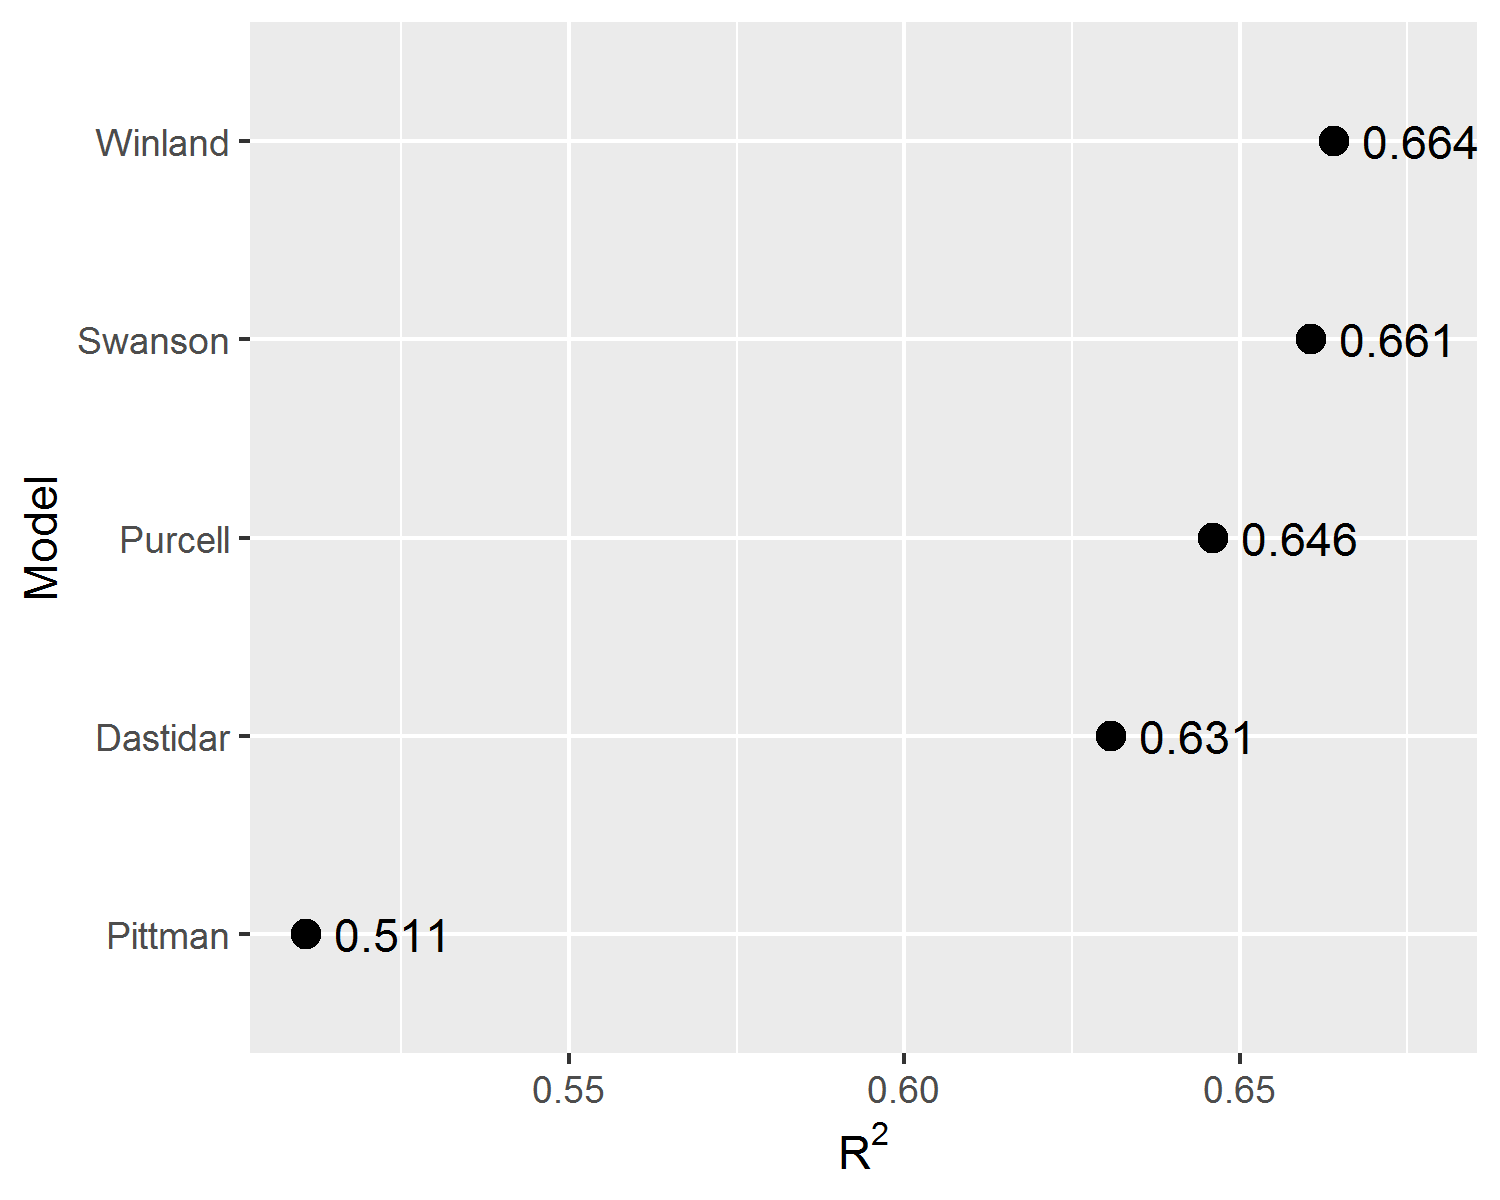 Comparison of the $R^2$ metric for the fitted linear regression models.